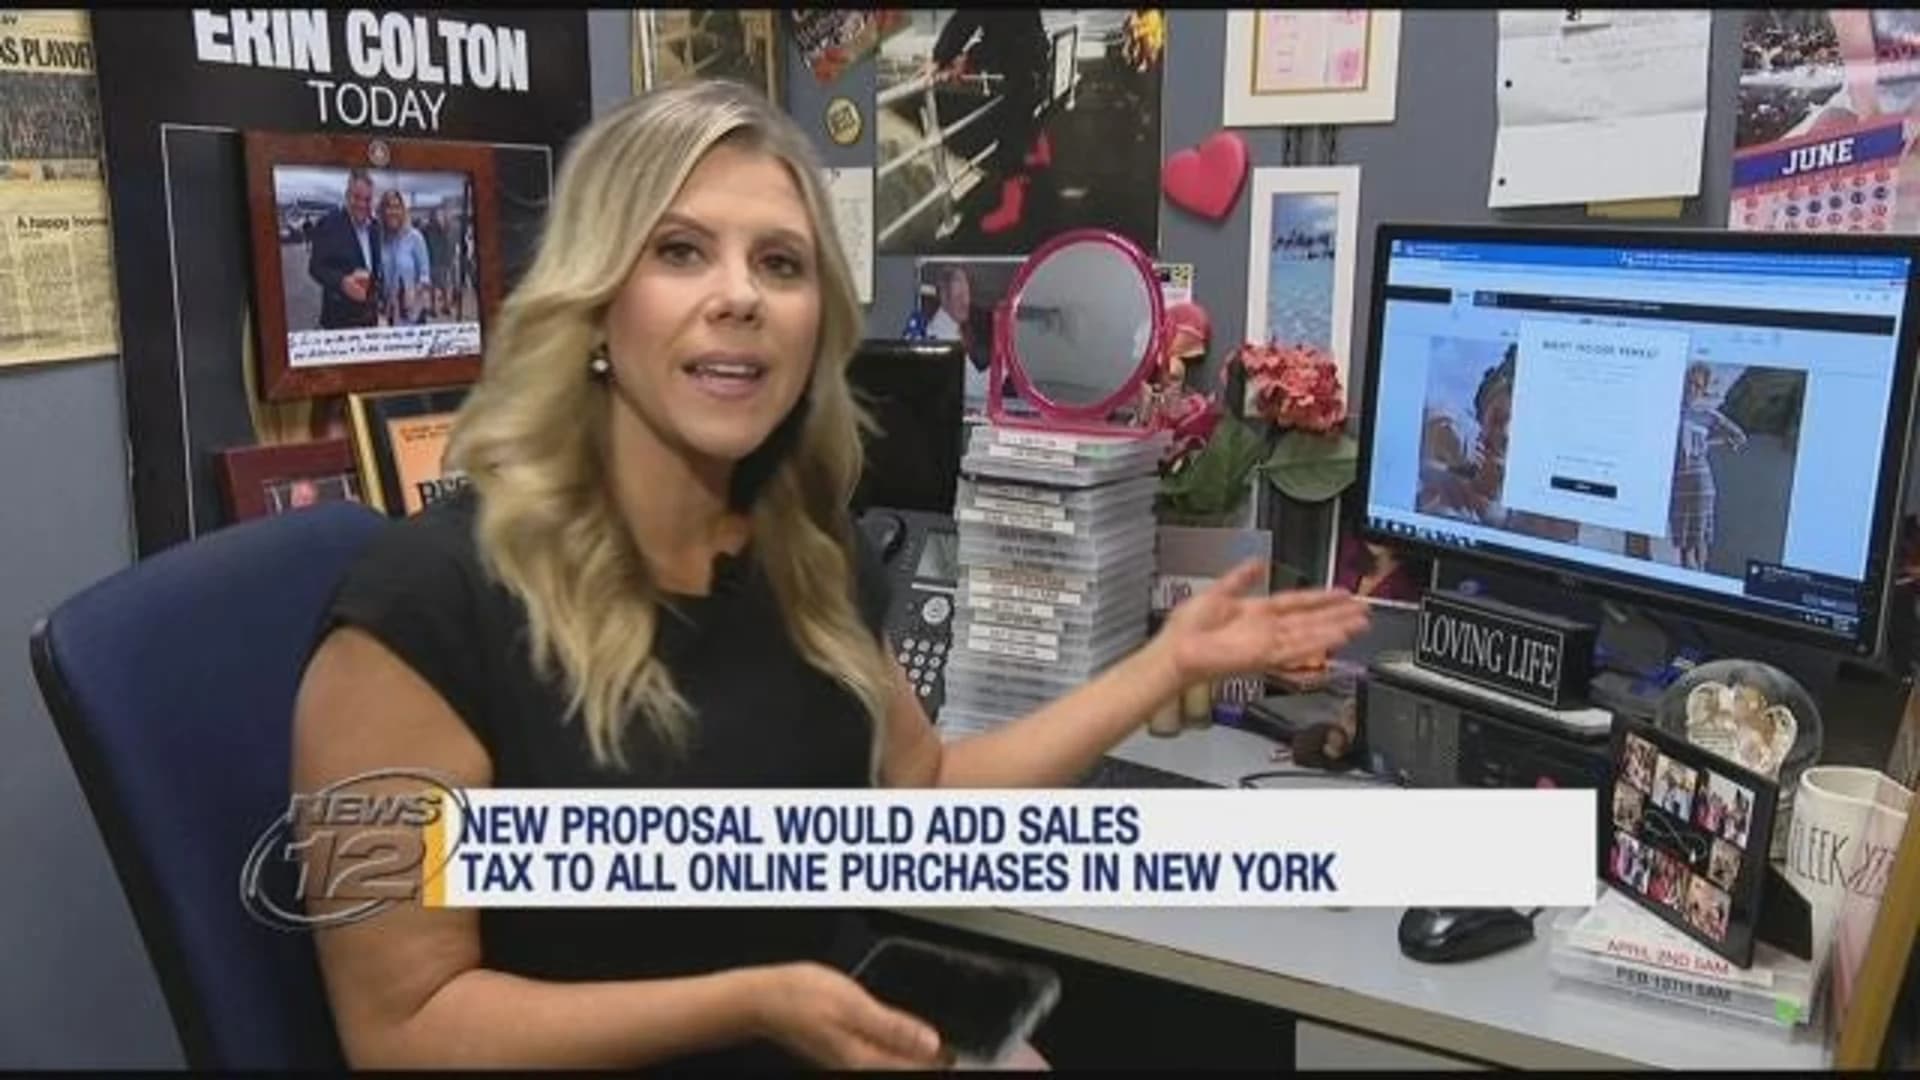 Gov. Cuomo eyes proposal to add sales tax to all online purchases in NY